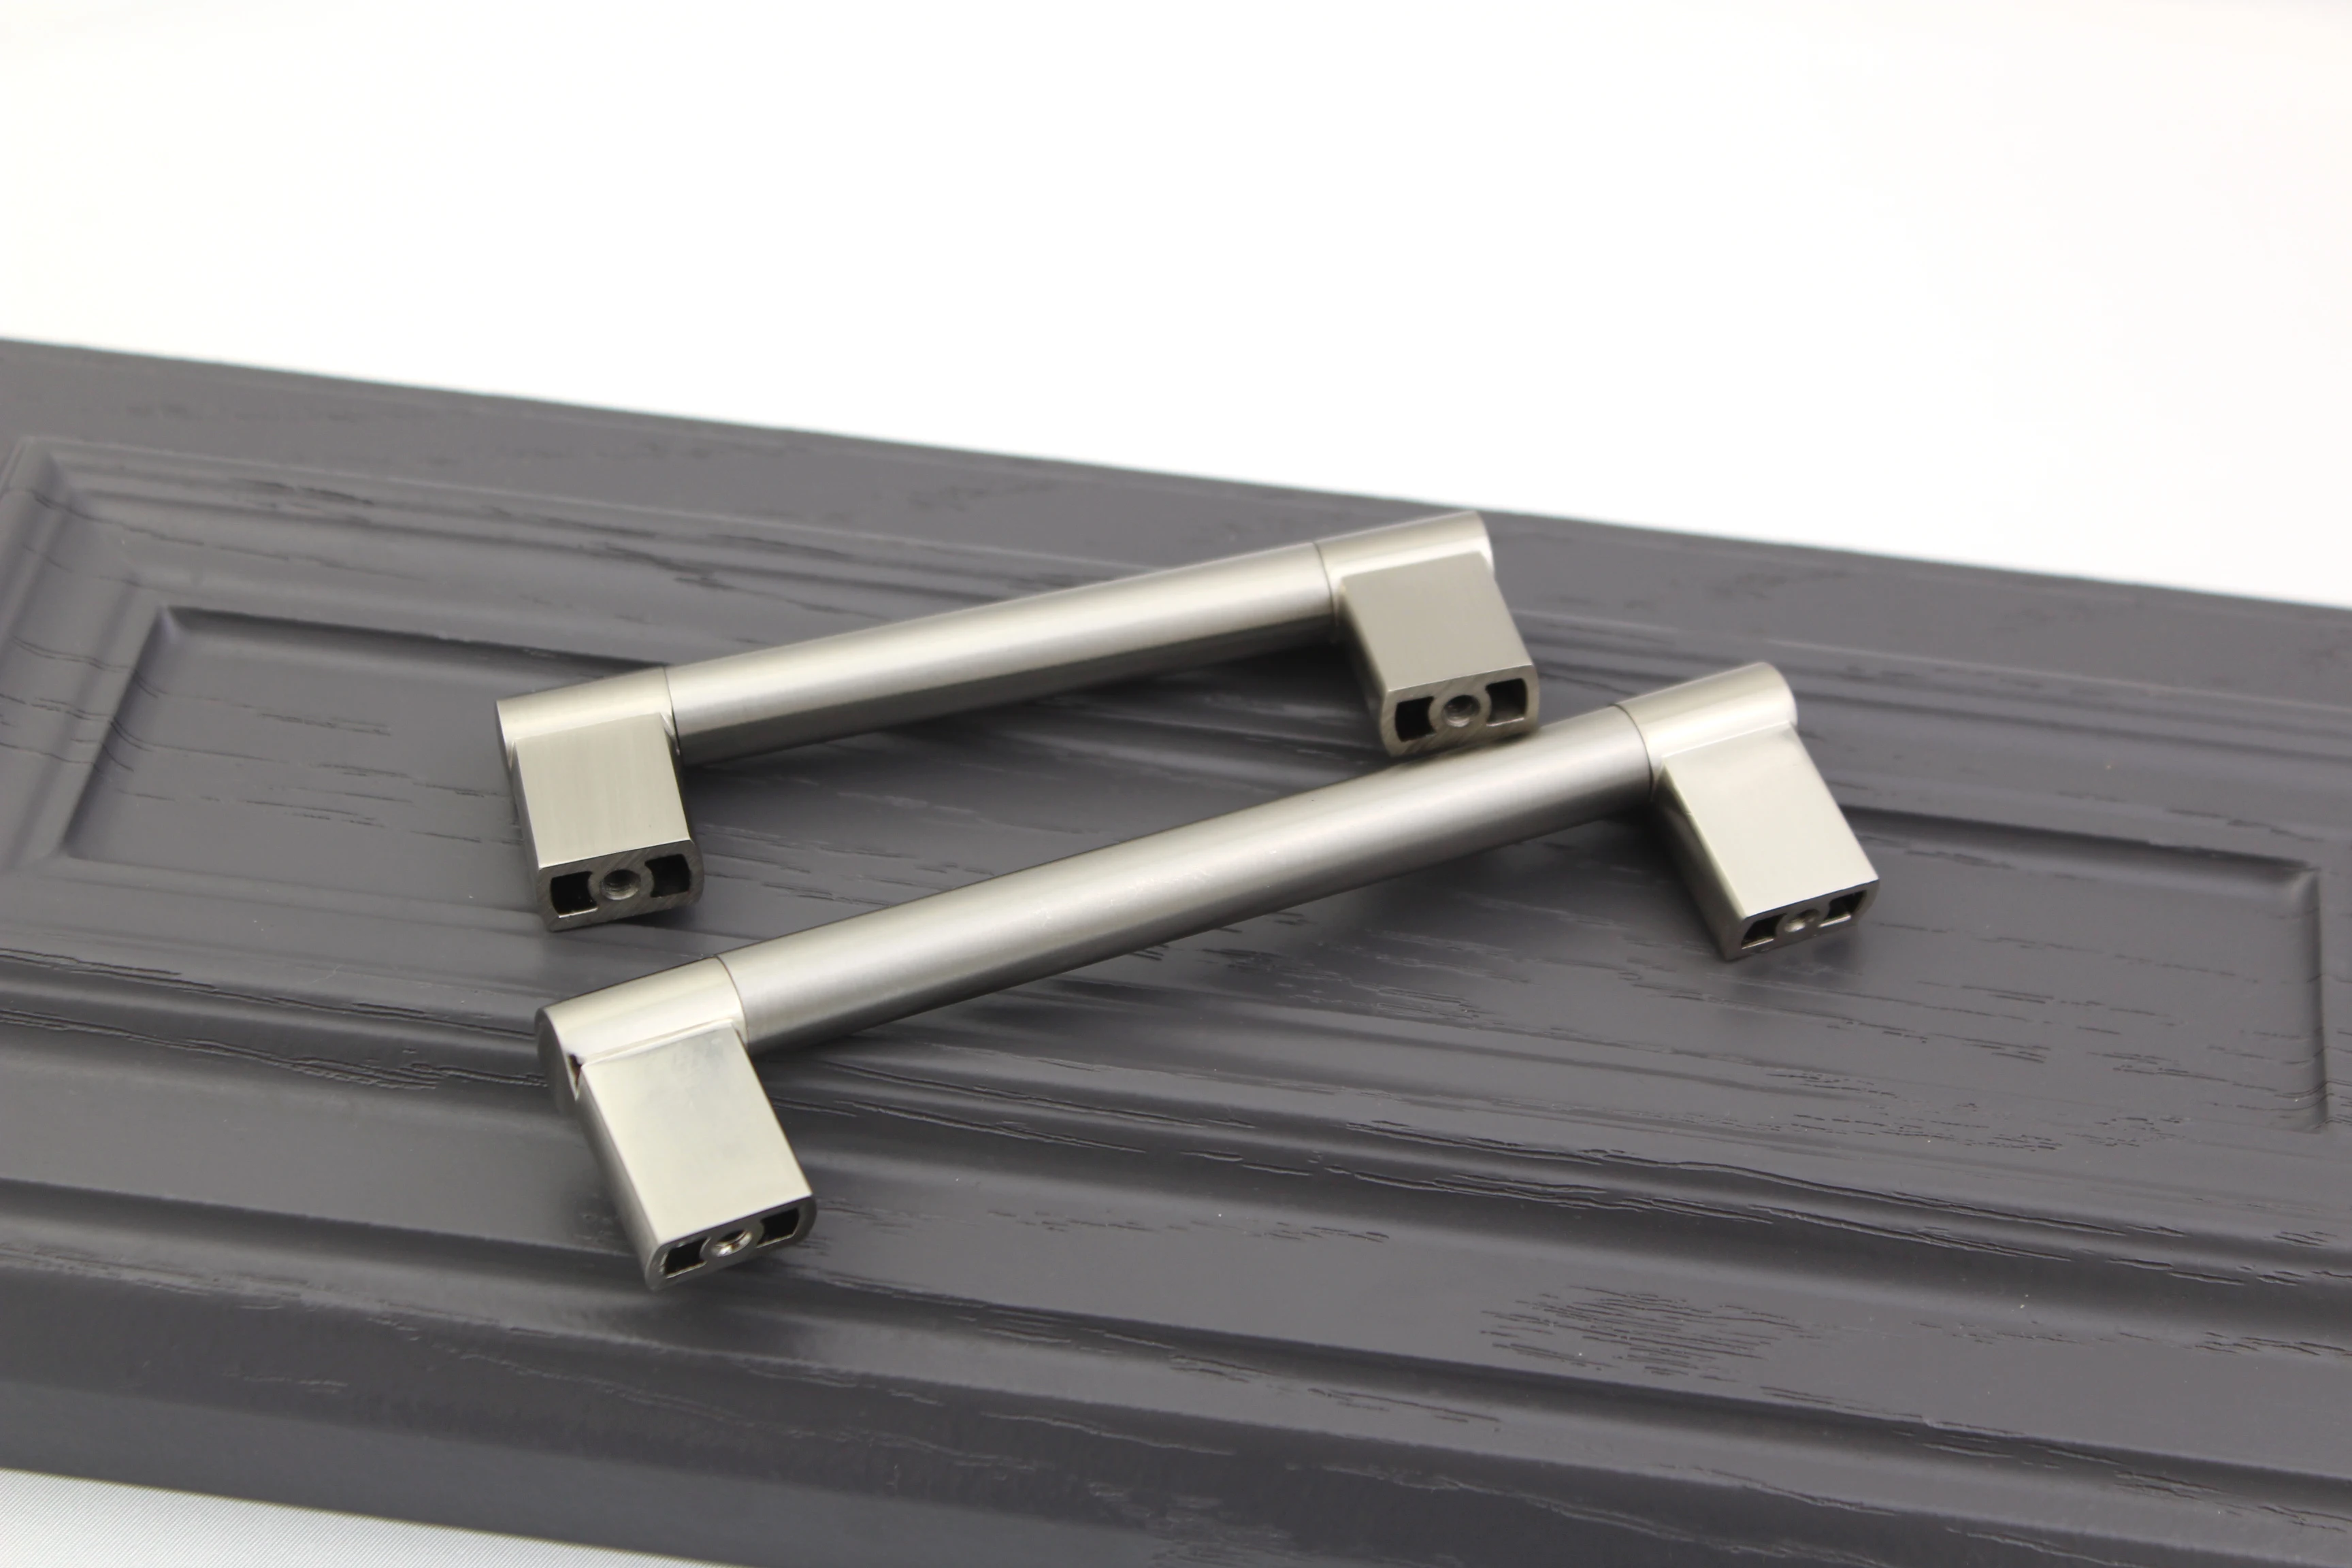 Modern style  kitchen cabinet handles 128 mm stainless steel door handle stainless steel pull